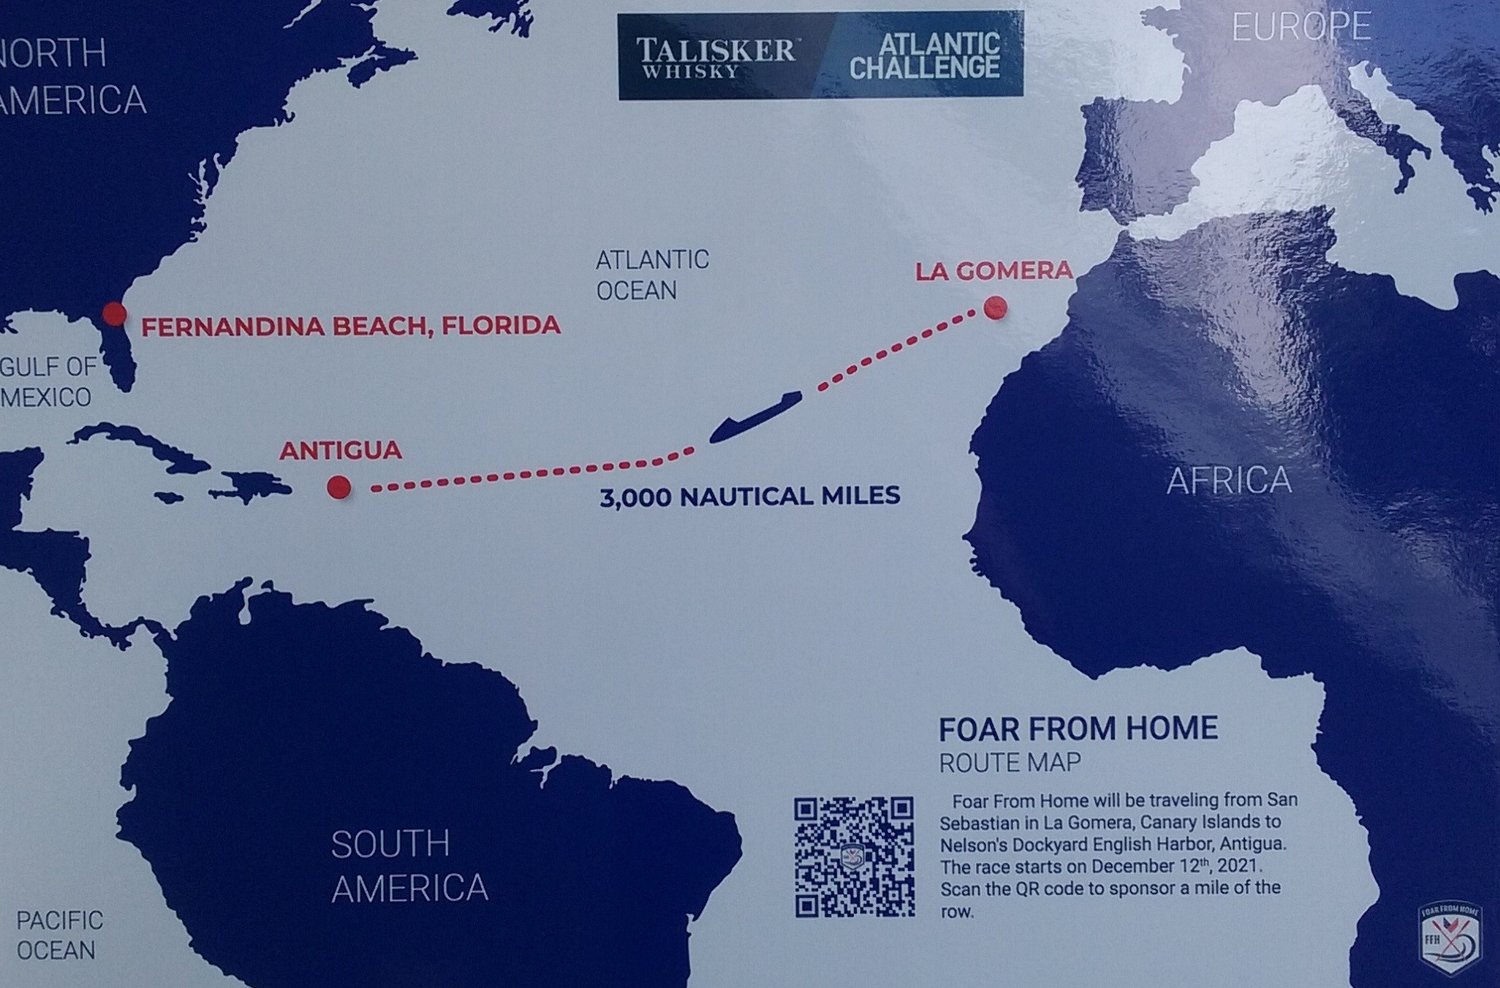 This map shows the route for the Talisker Whisky Atlantic Challenge. Rowers will leave the Canary Islands and row 3,000 miles to Antigua.